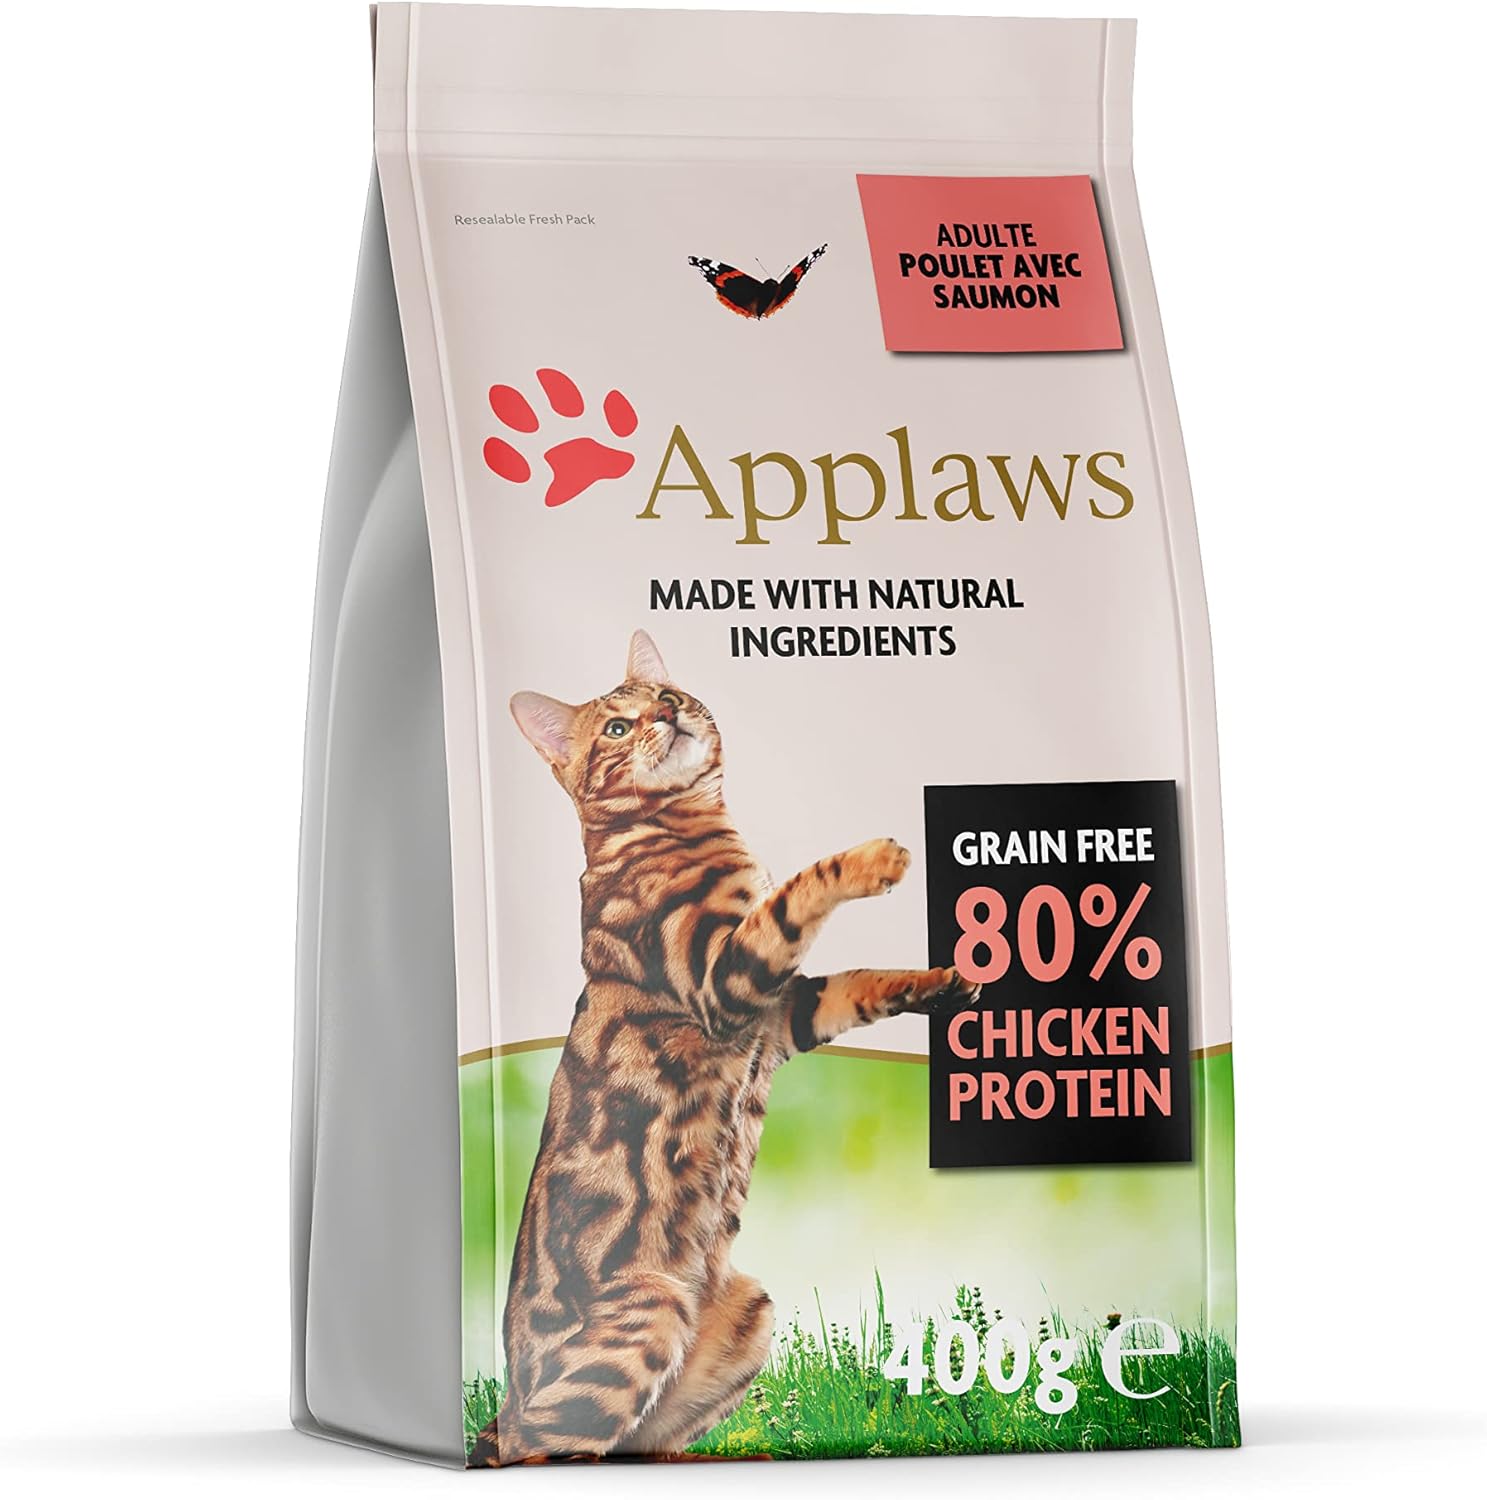 Applaws Complete and Grain Free Adult Dry Cat Food, Chicken with Salmon 1 x 400g Bag?4003C